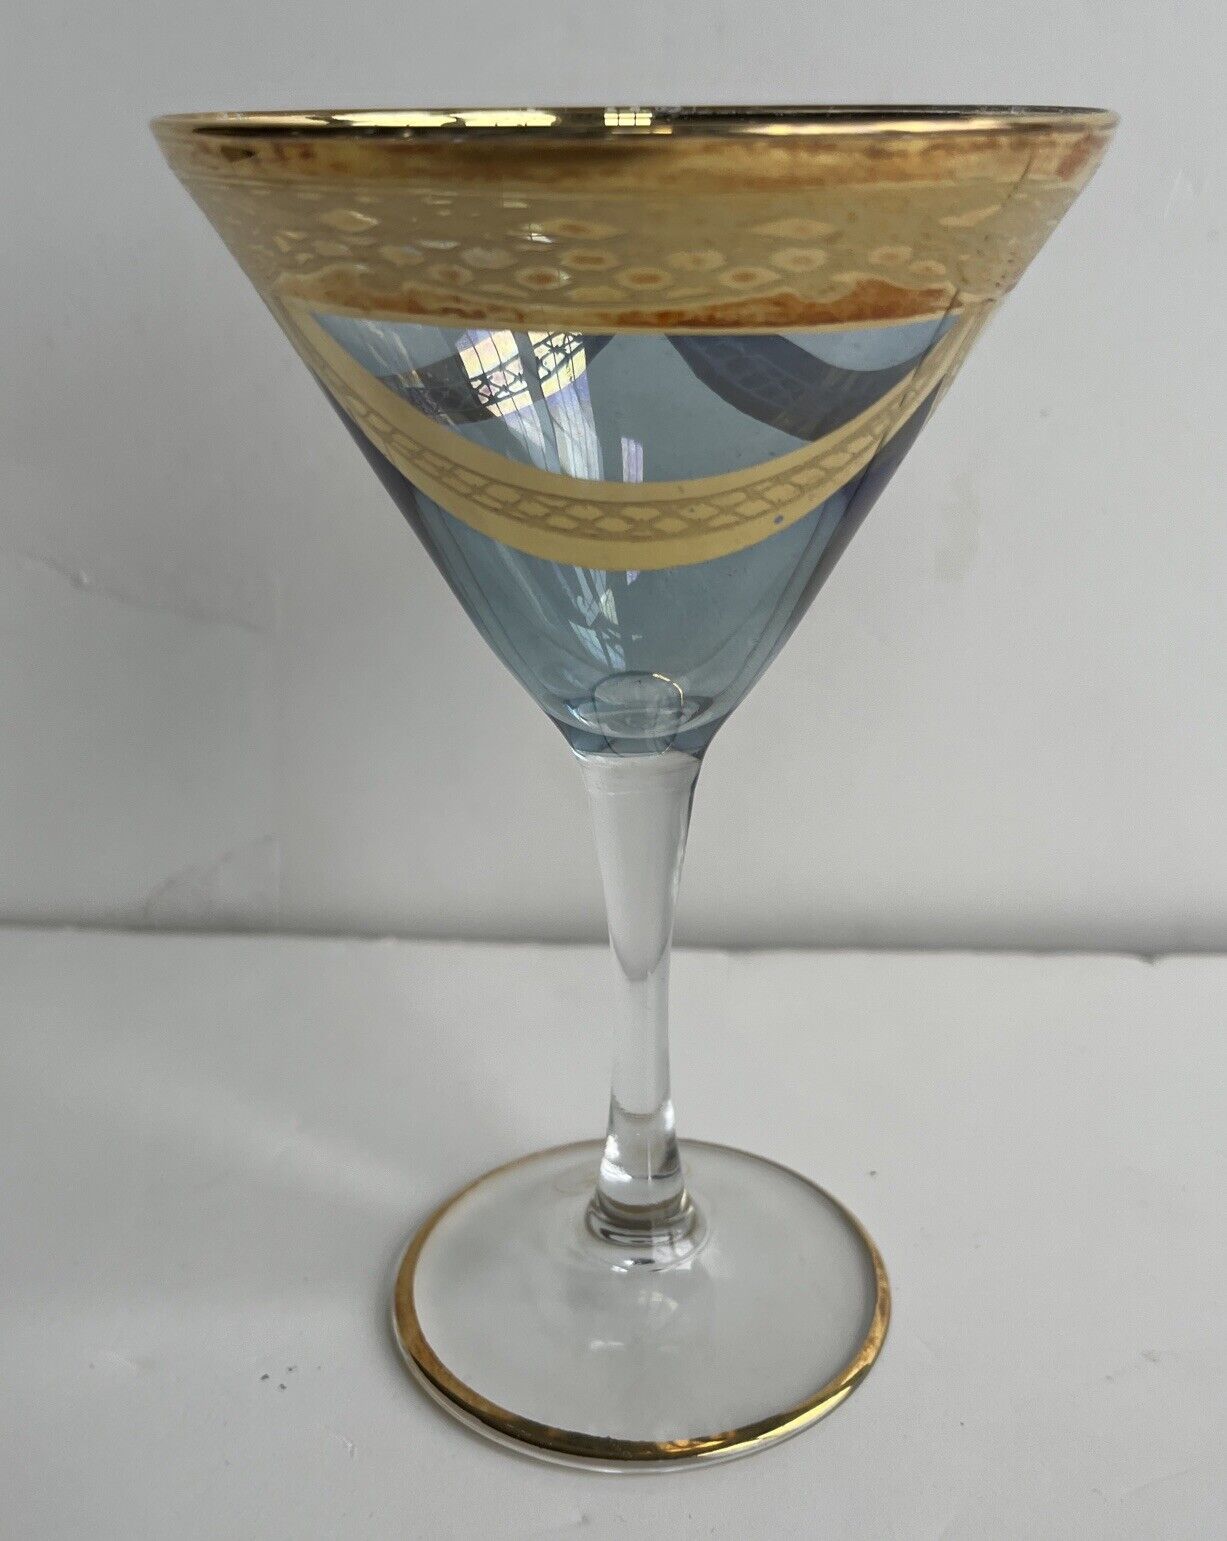 VTG Cristal Mode Martini Glasses Made In Italy Blue Cup With Gold Trim Elegant